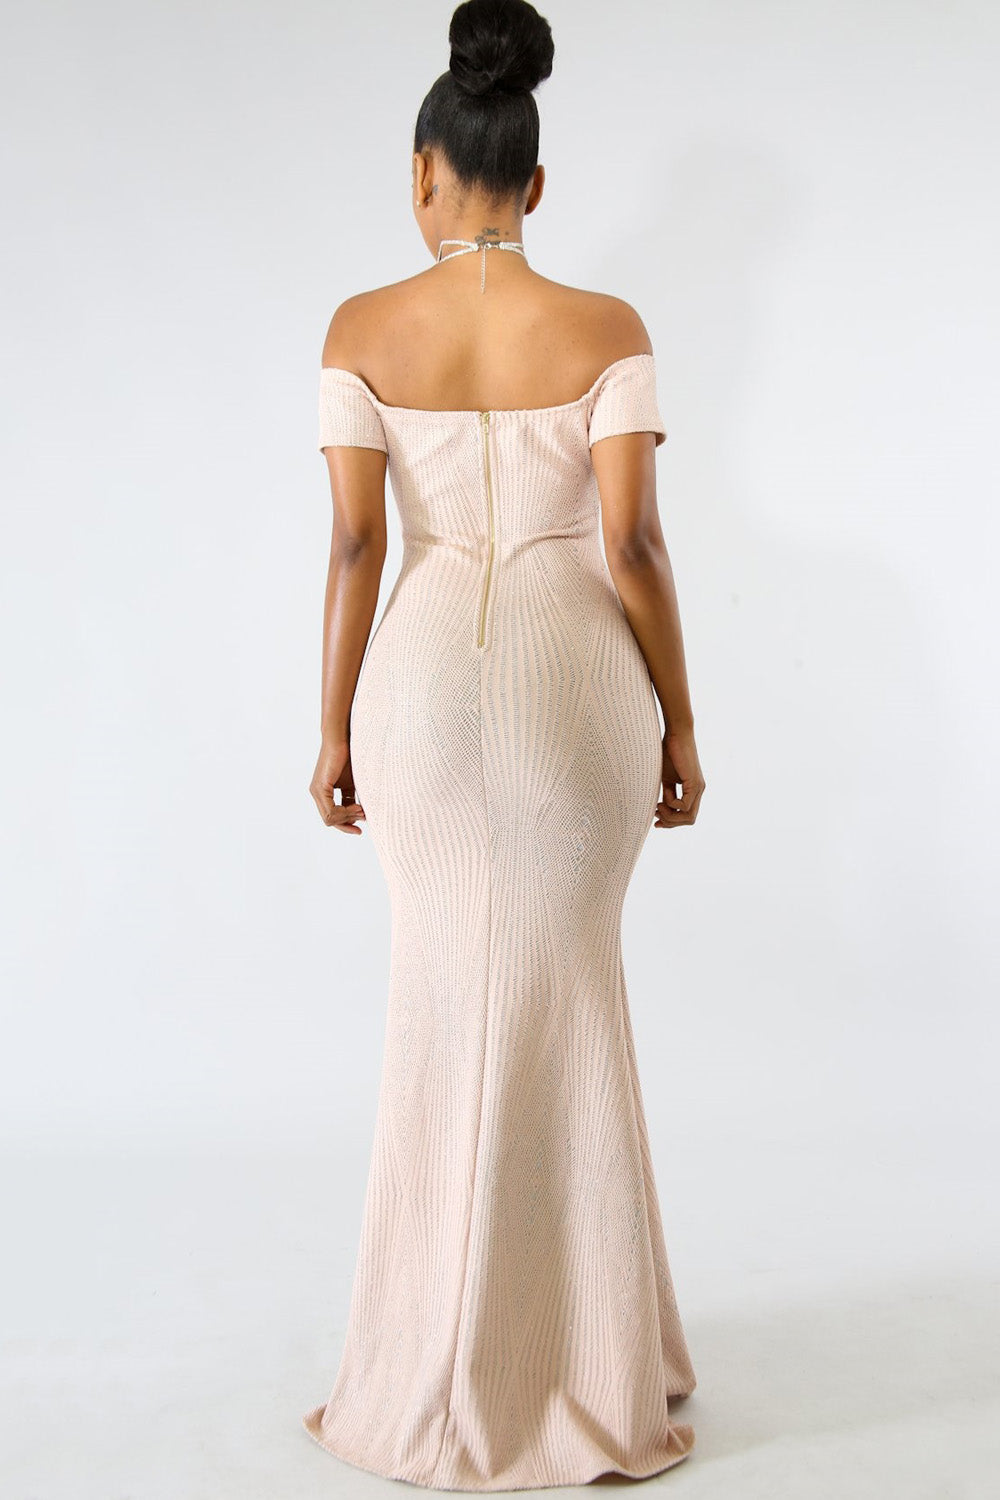 goPals floor length dress with off-the-shoulder neckline and mid-thigh high slit